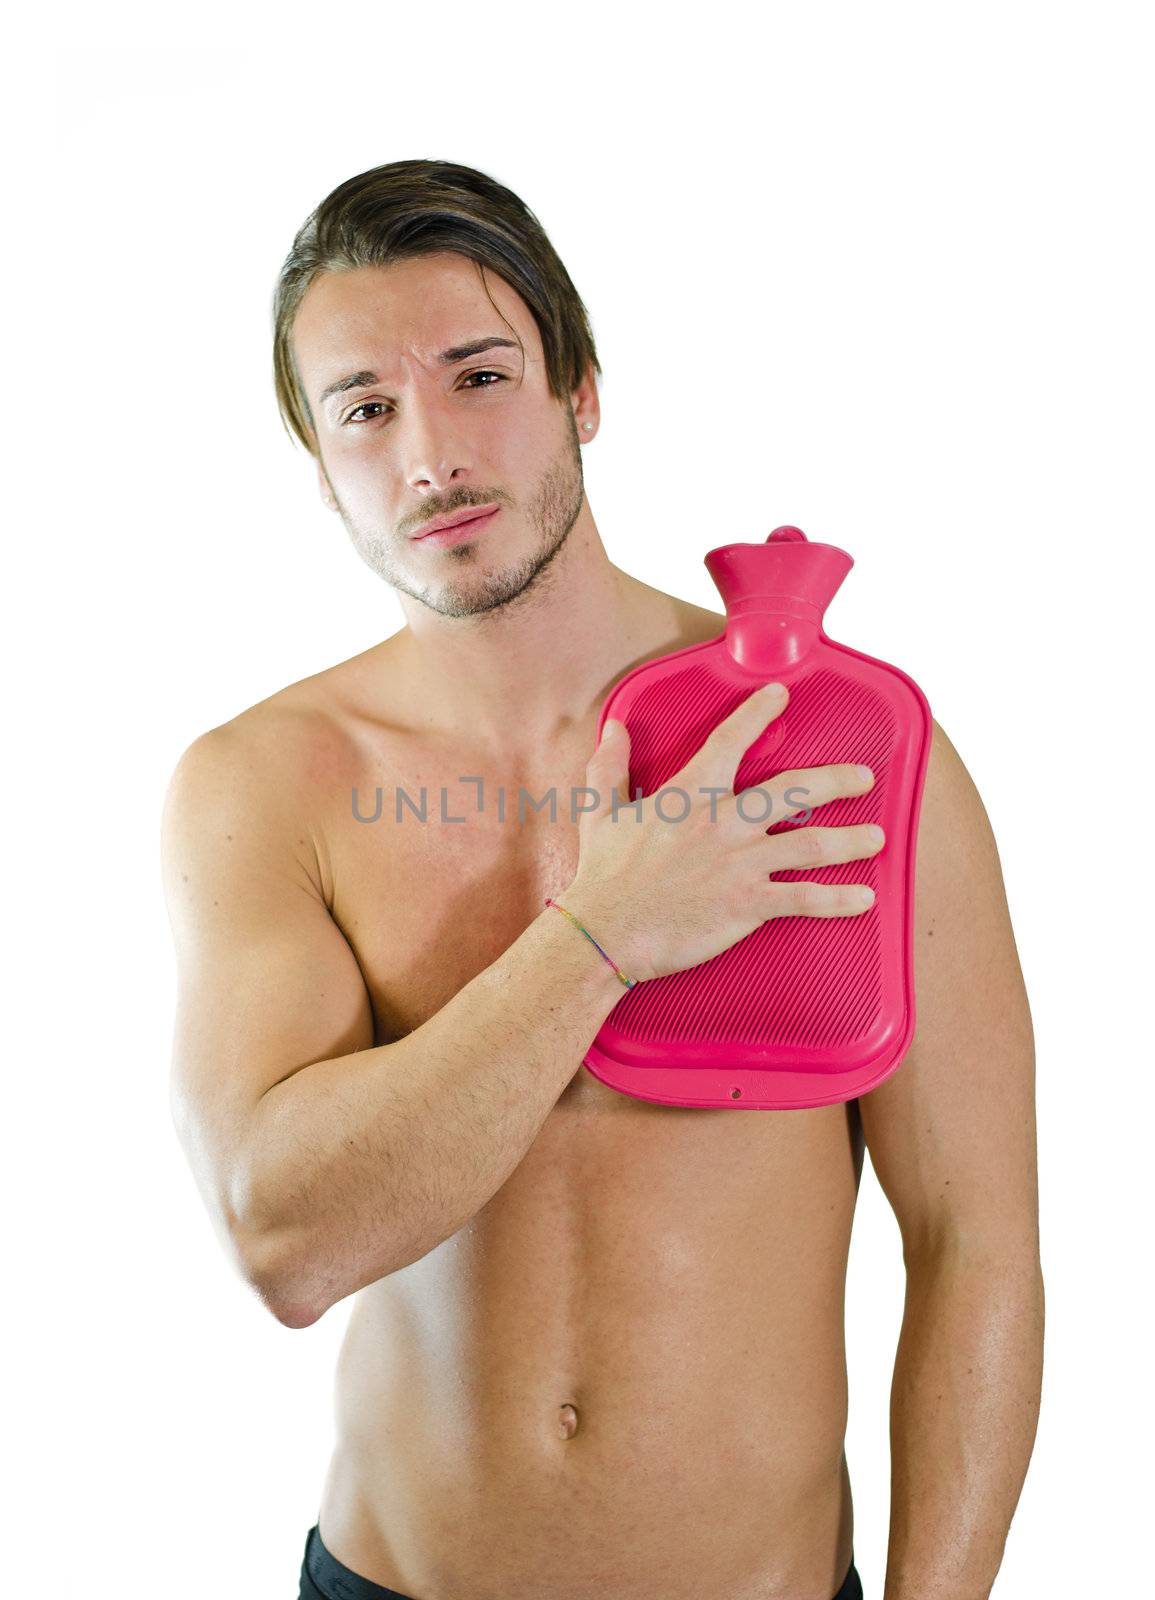 Handsome young man with shoulder pain, holding hot water bottle by artofphoto